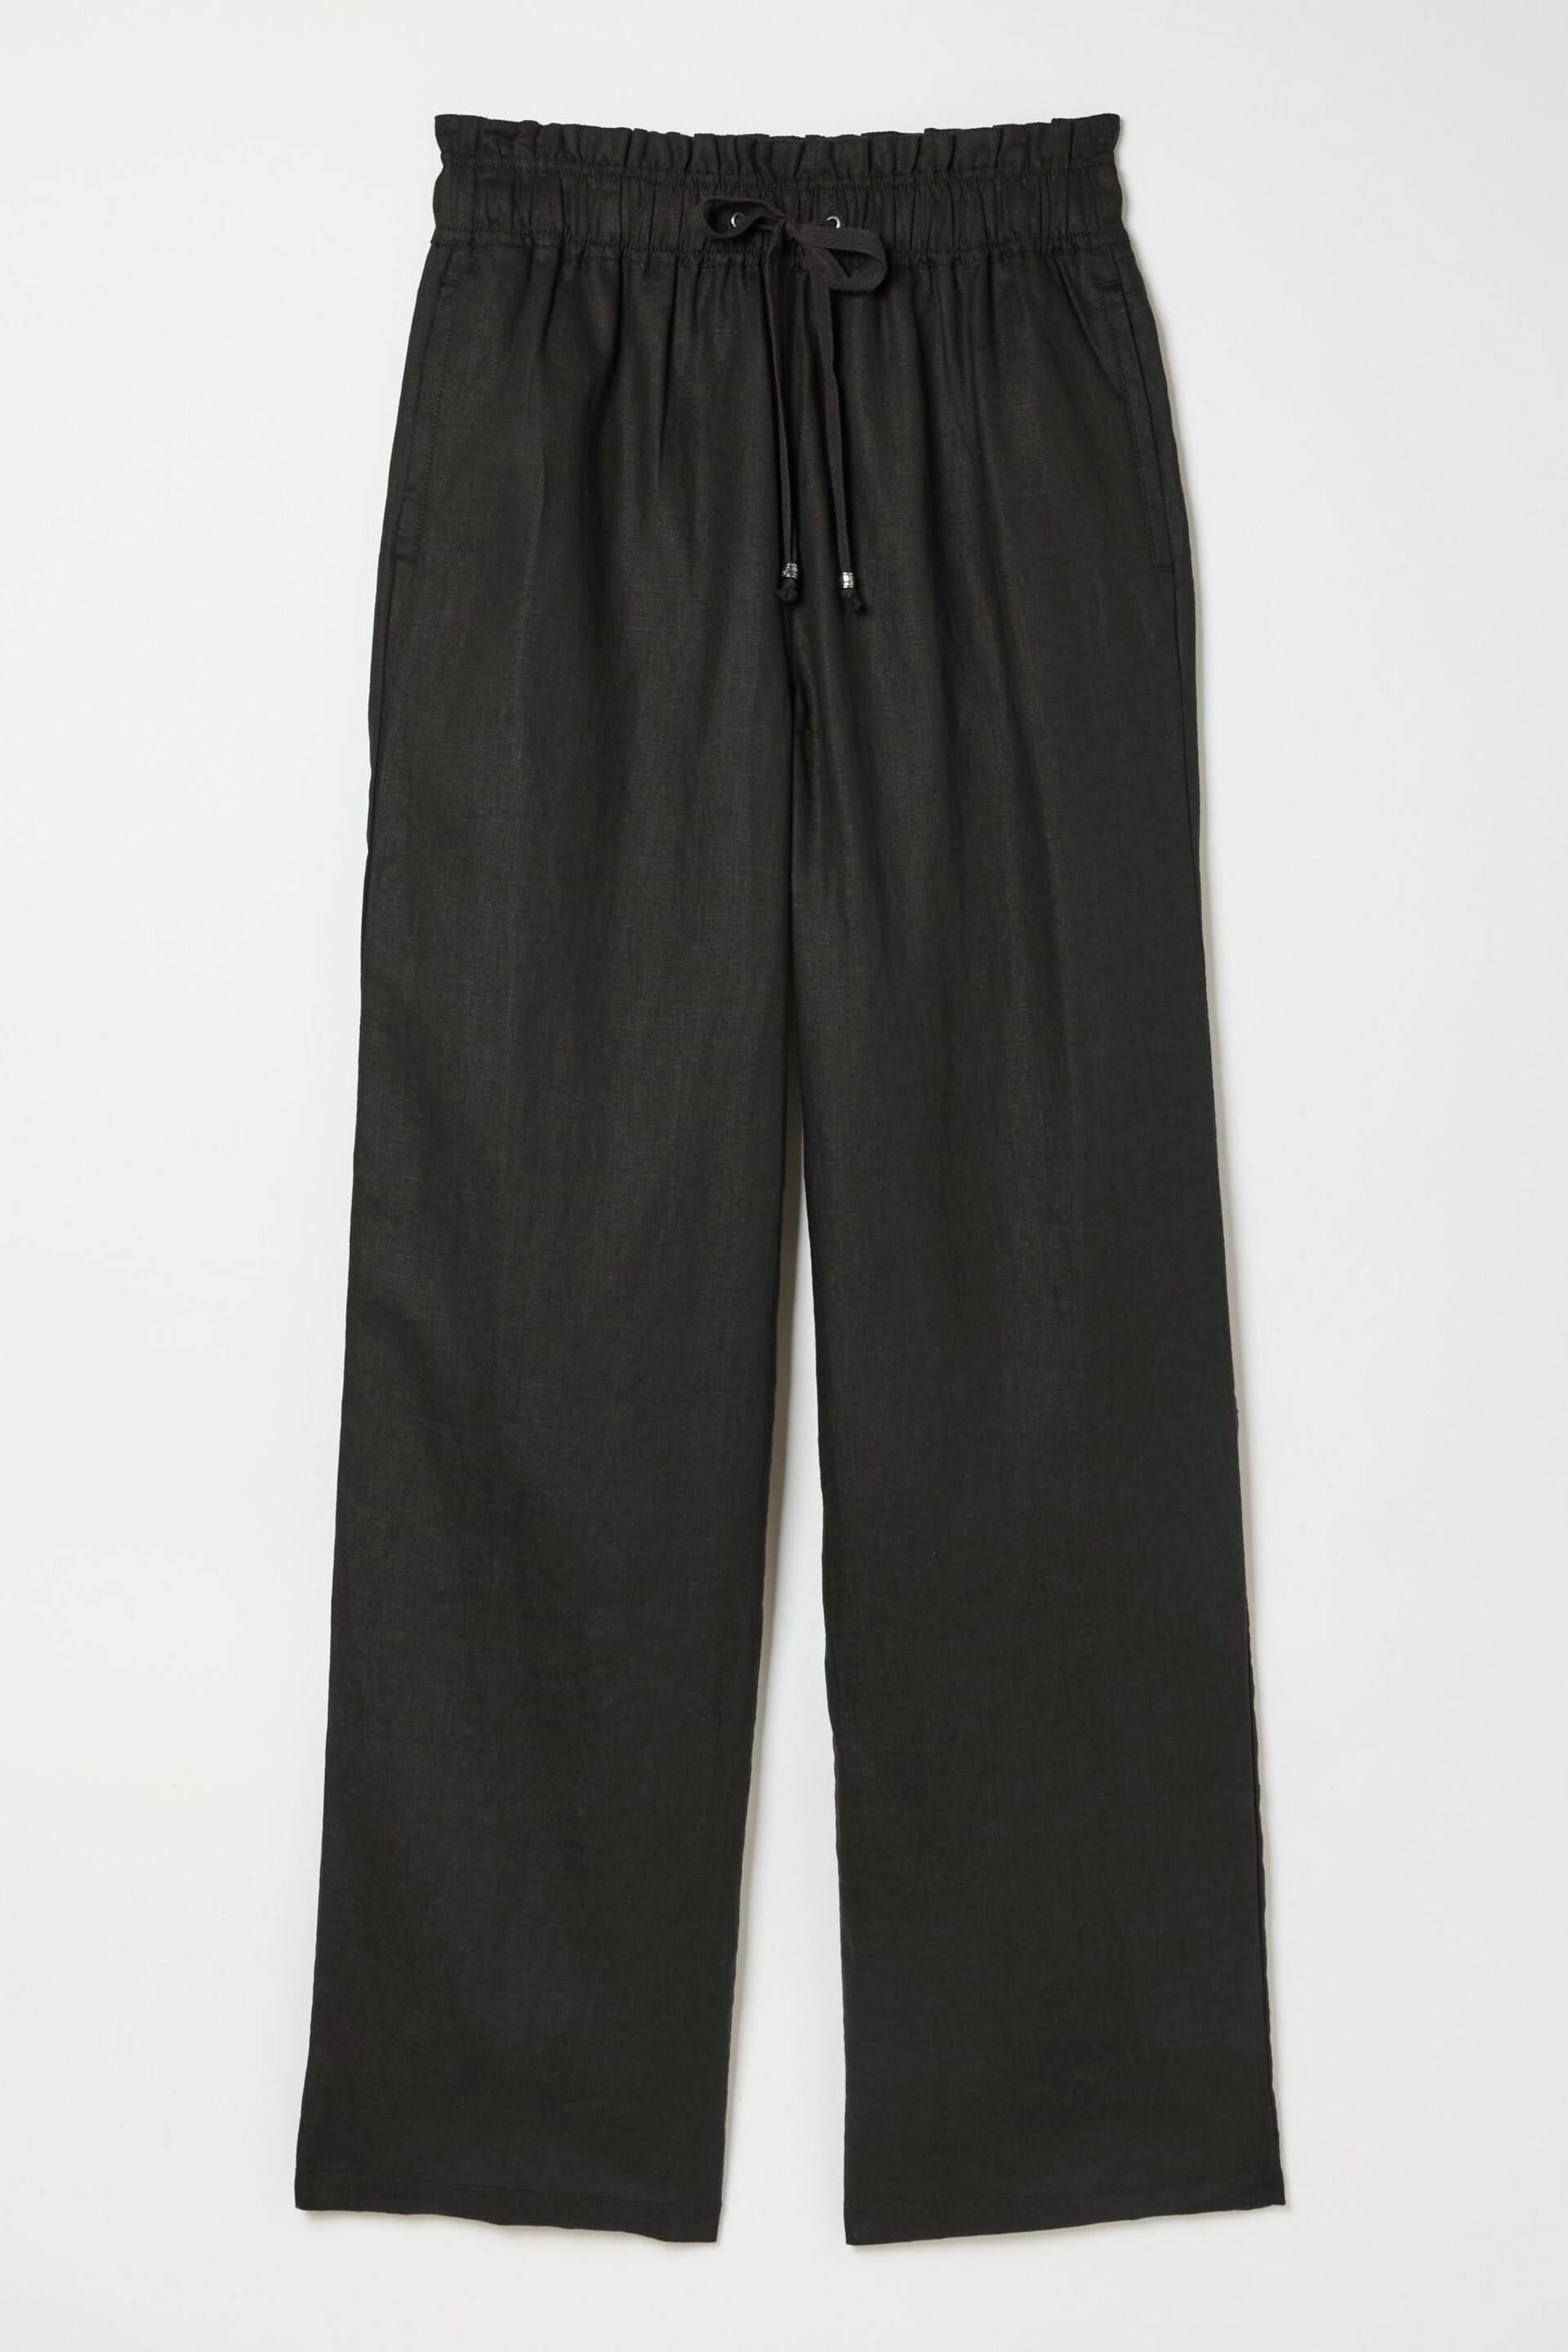 FatFace Black Iva Wide Leg Linen Trousers - Image 6 of 6